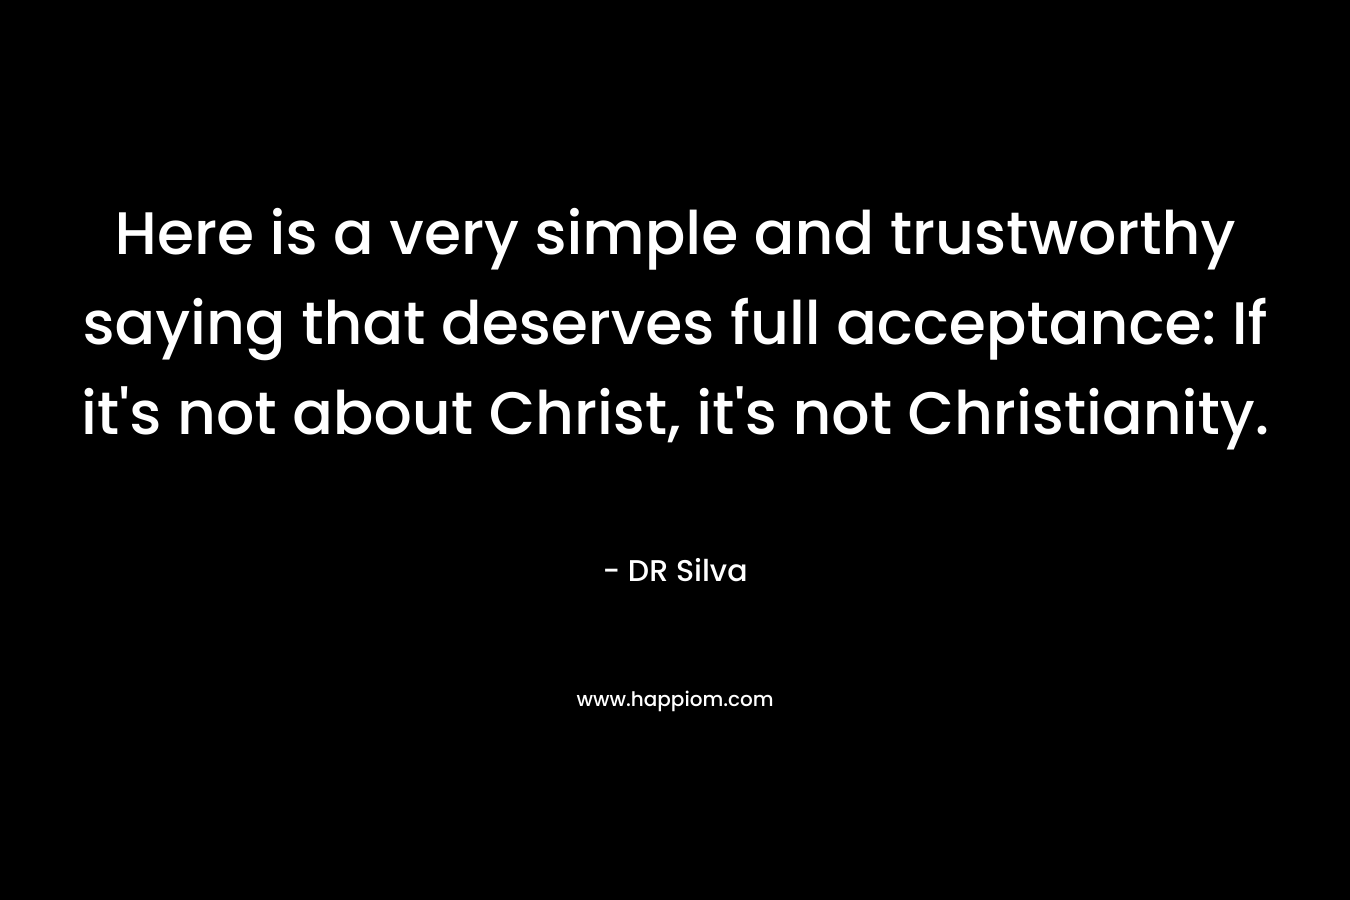 Here is a very simple and trustworthy saying that deserves full acceptance: If it’s not about Christ, it’s not Christianity. – DR Silva